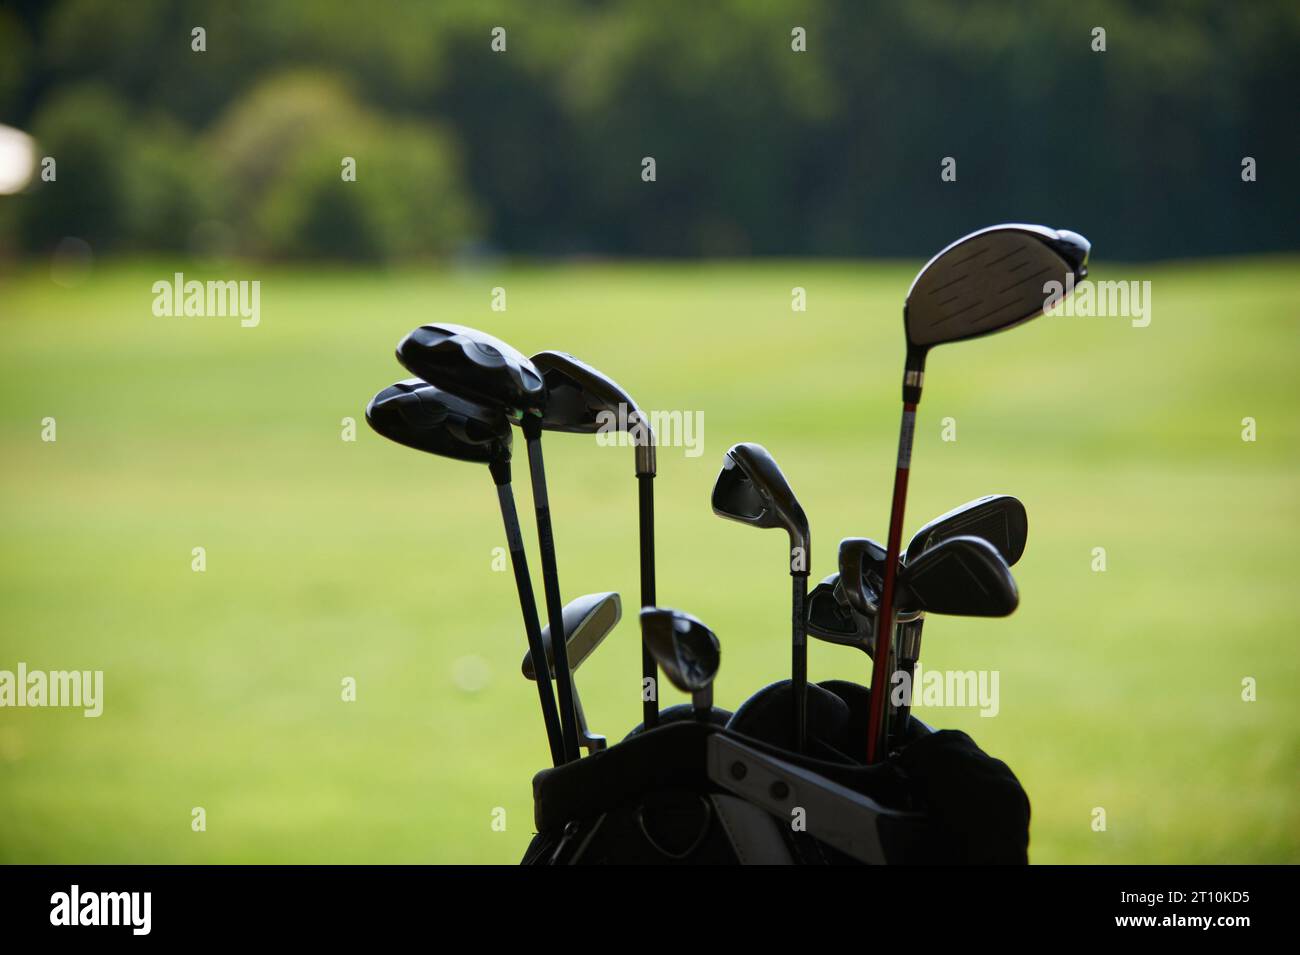 golf clubs on the background of a green lawn close up Stock Photo